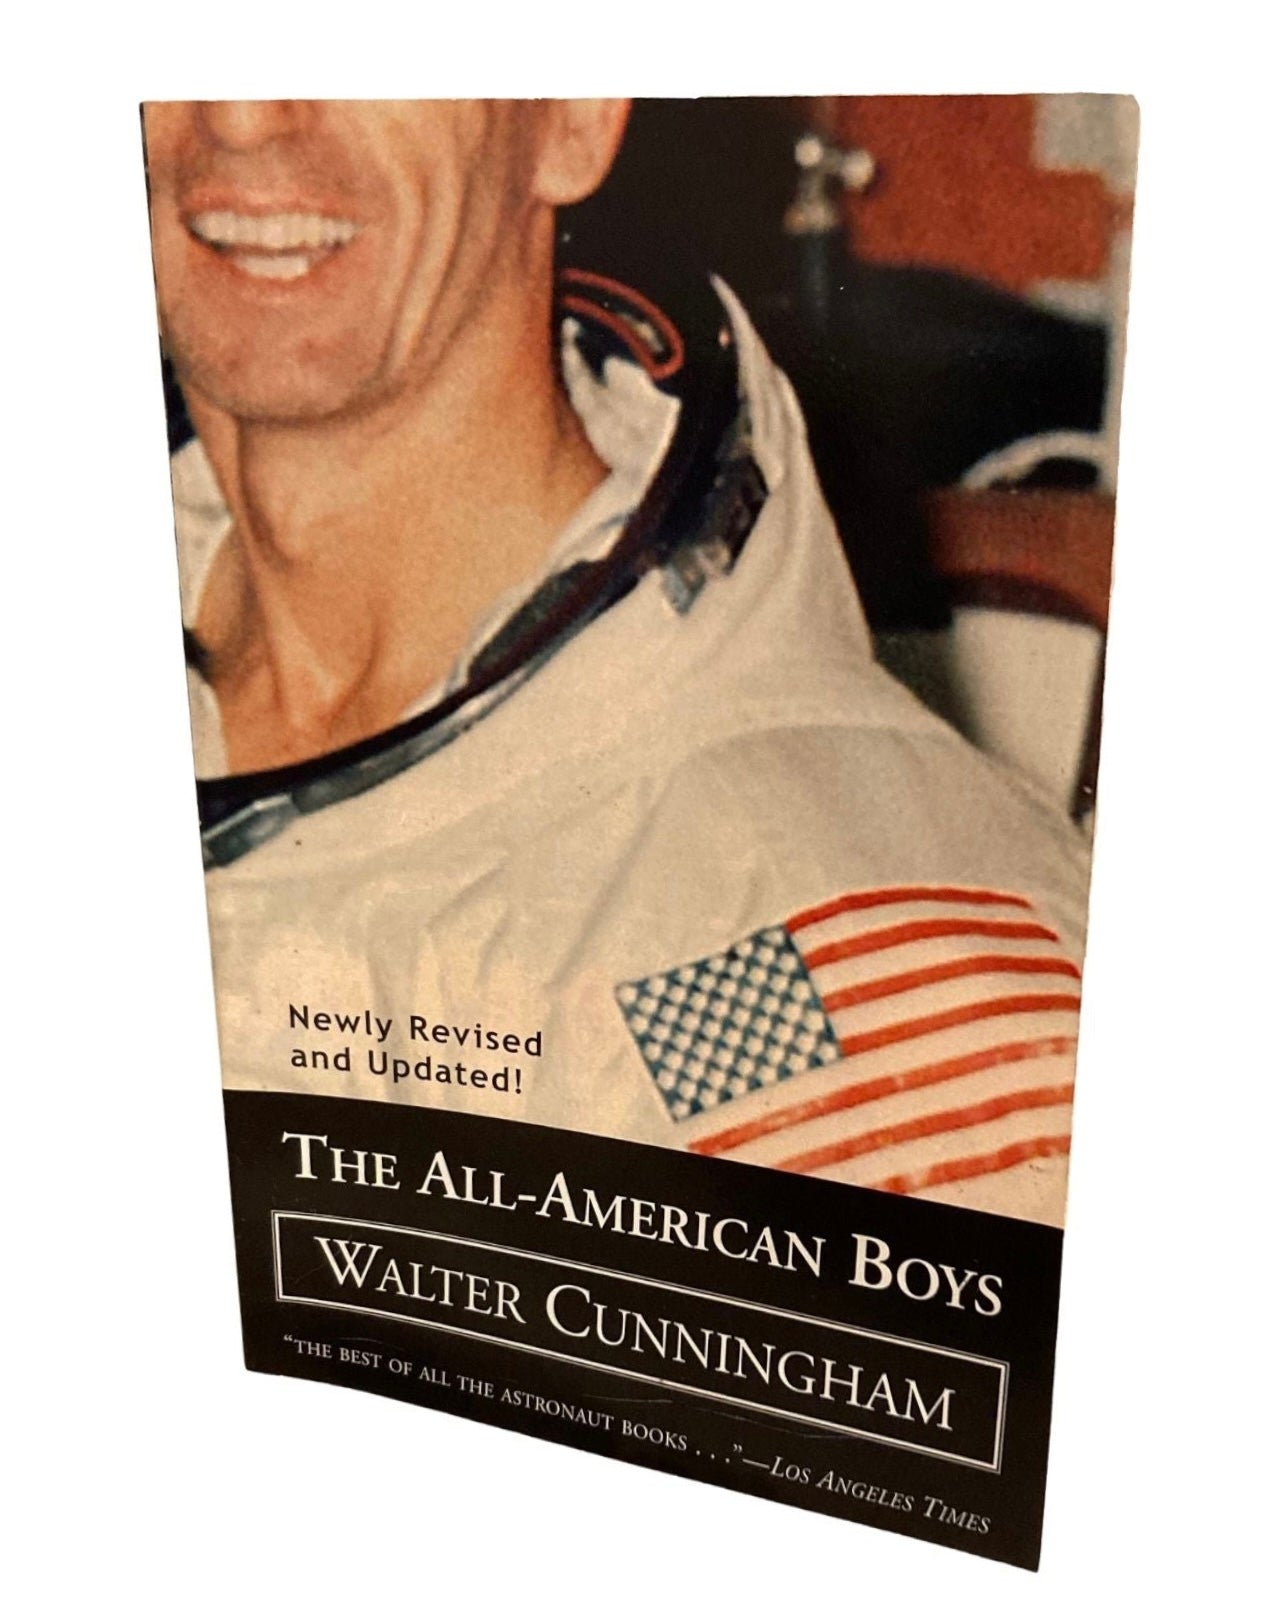 The All - American Boys, Signed by Walter Cunningham, First Updated Paperback Edition, 2004 - The Great Republic